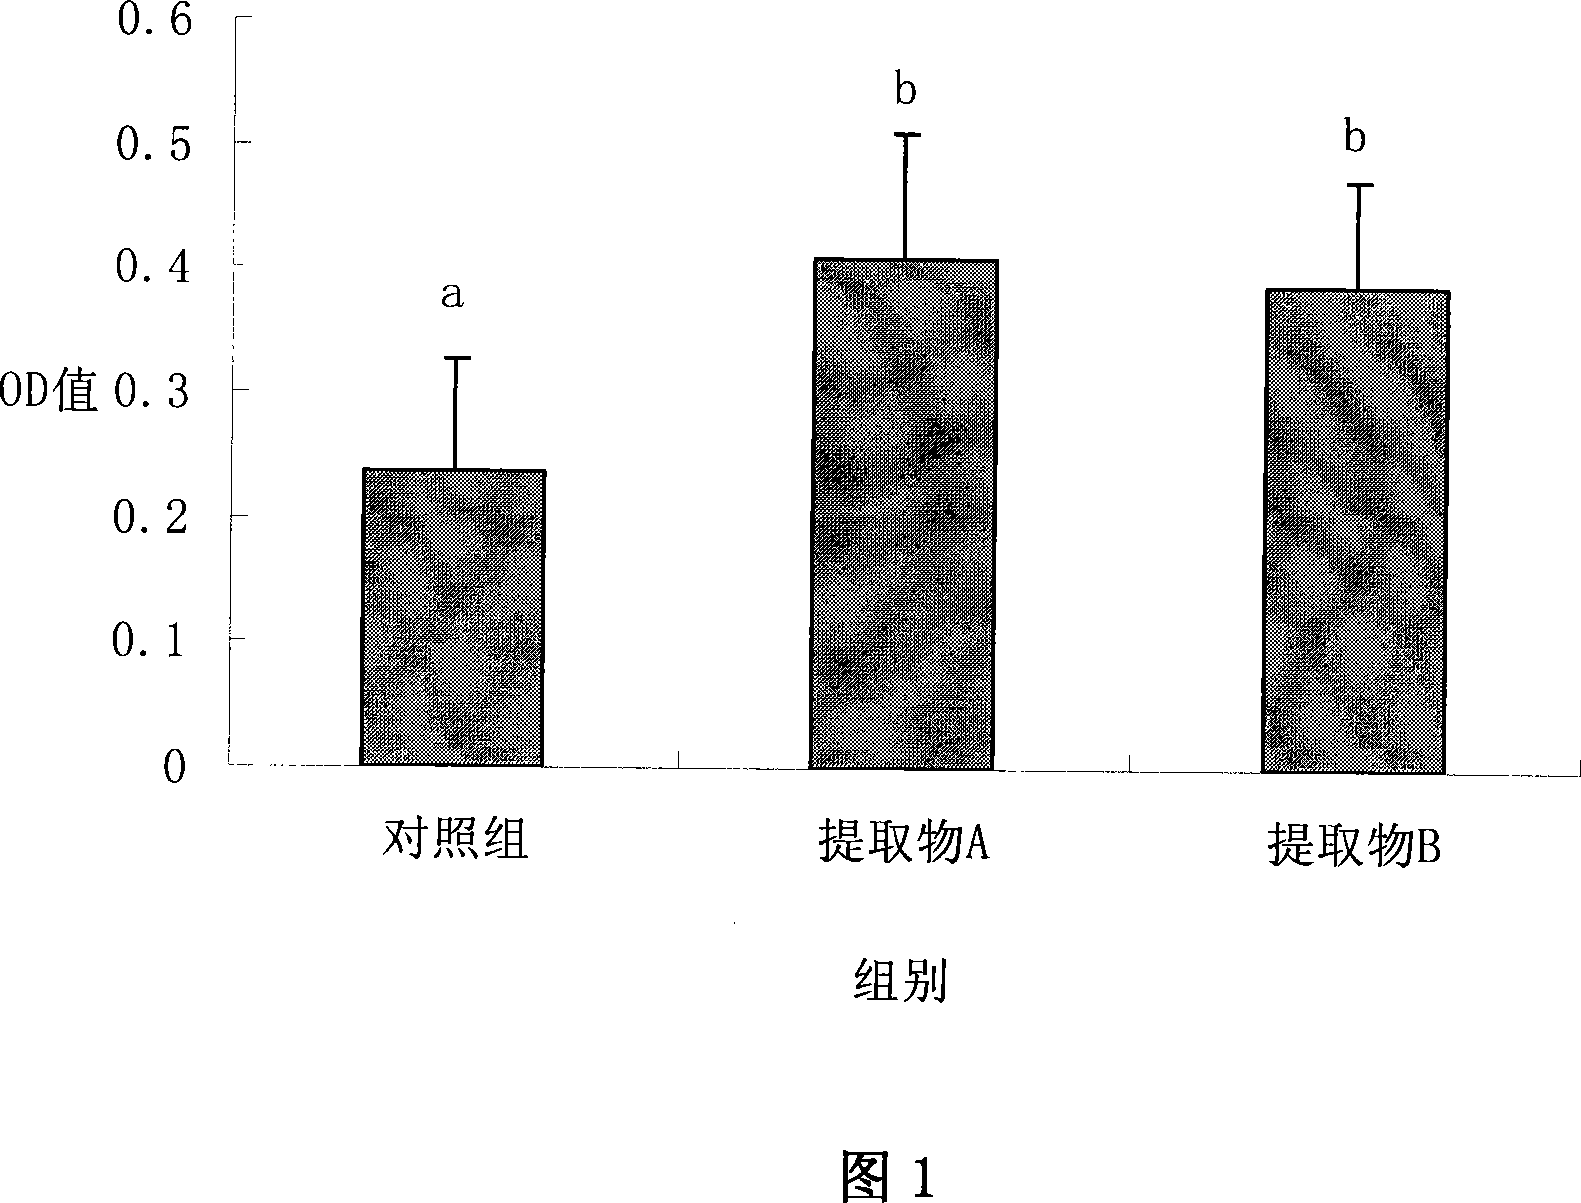 Method of extracting immunologic adjuvant component from cochinchina momordica seed